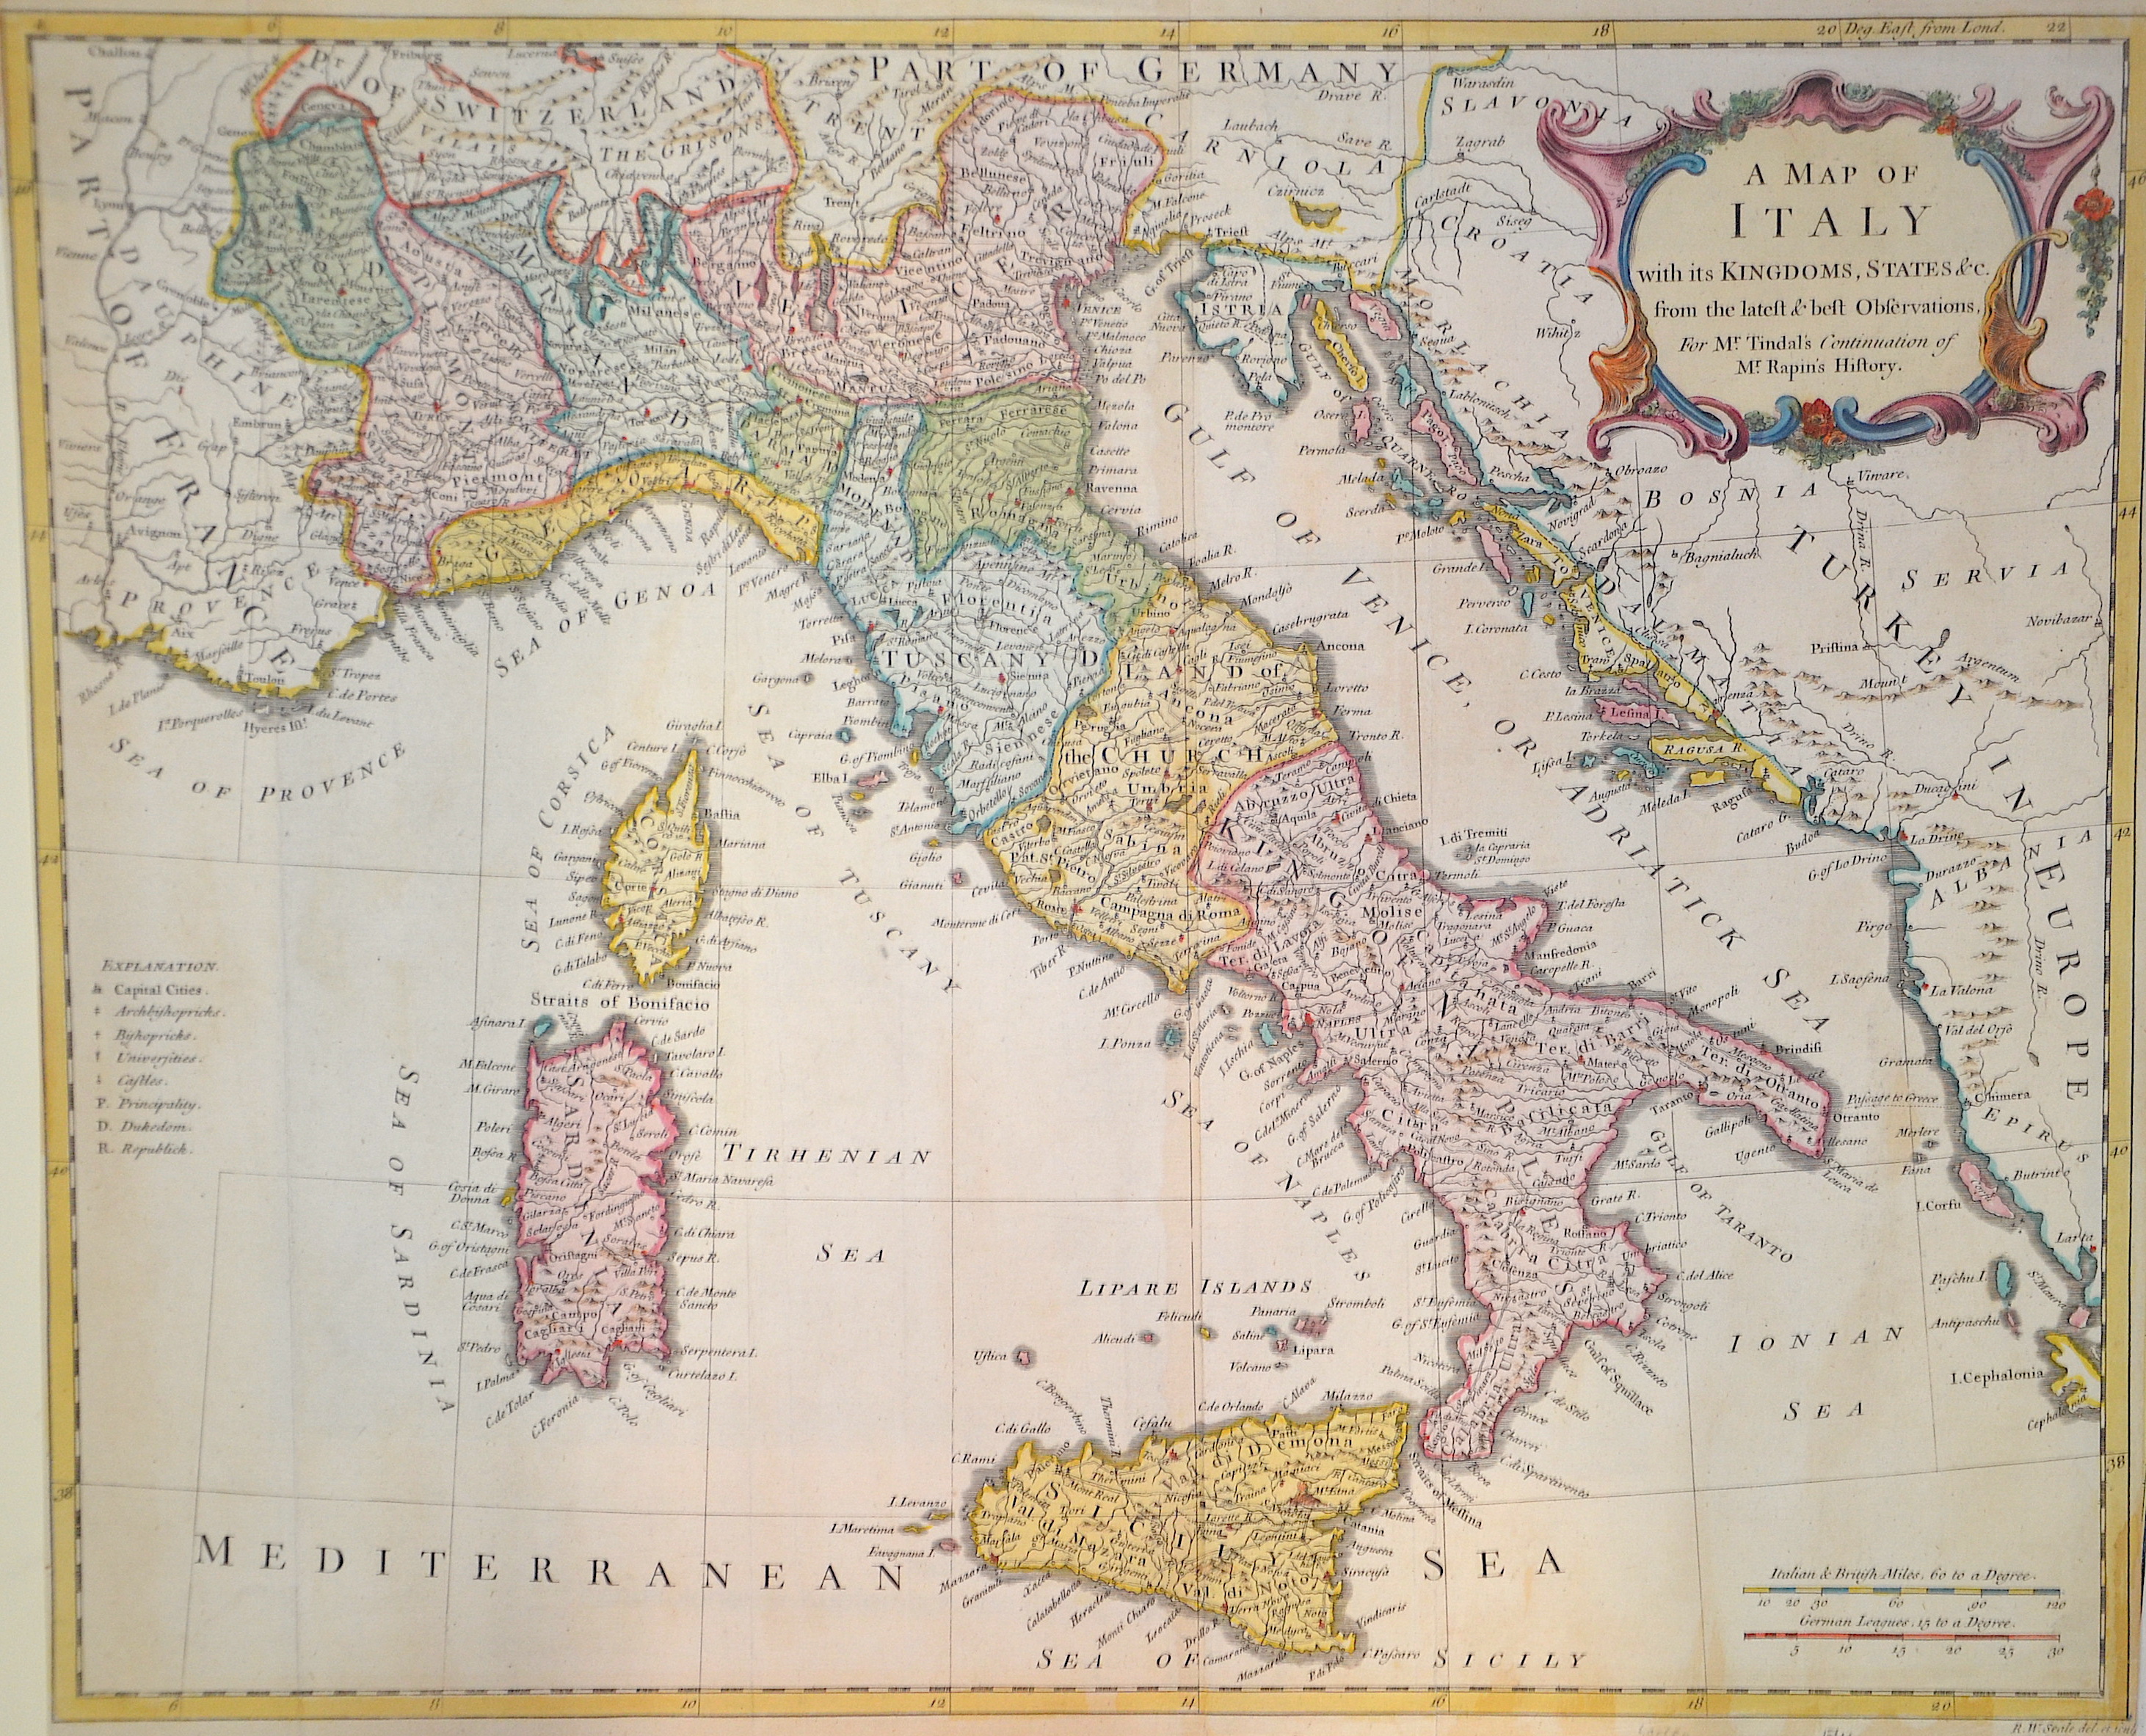 Seale  A map of Italy with ist Kingdoms, States and..  for Mr Tindal’s Continuation of Mr Rapins History.